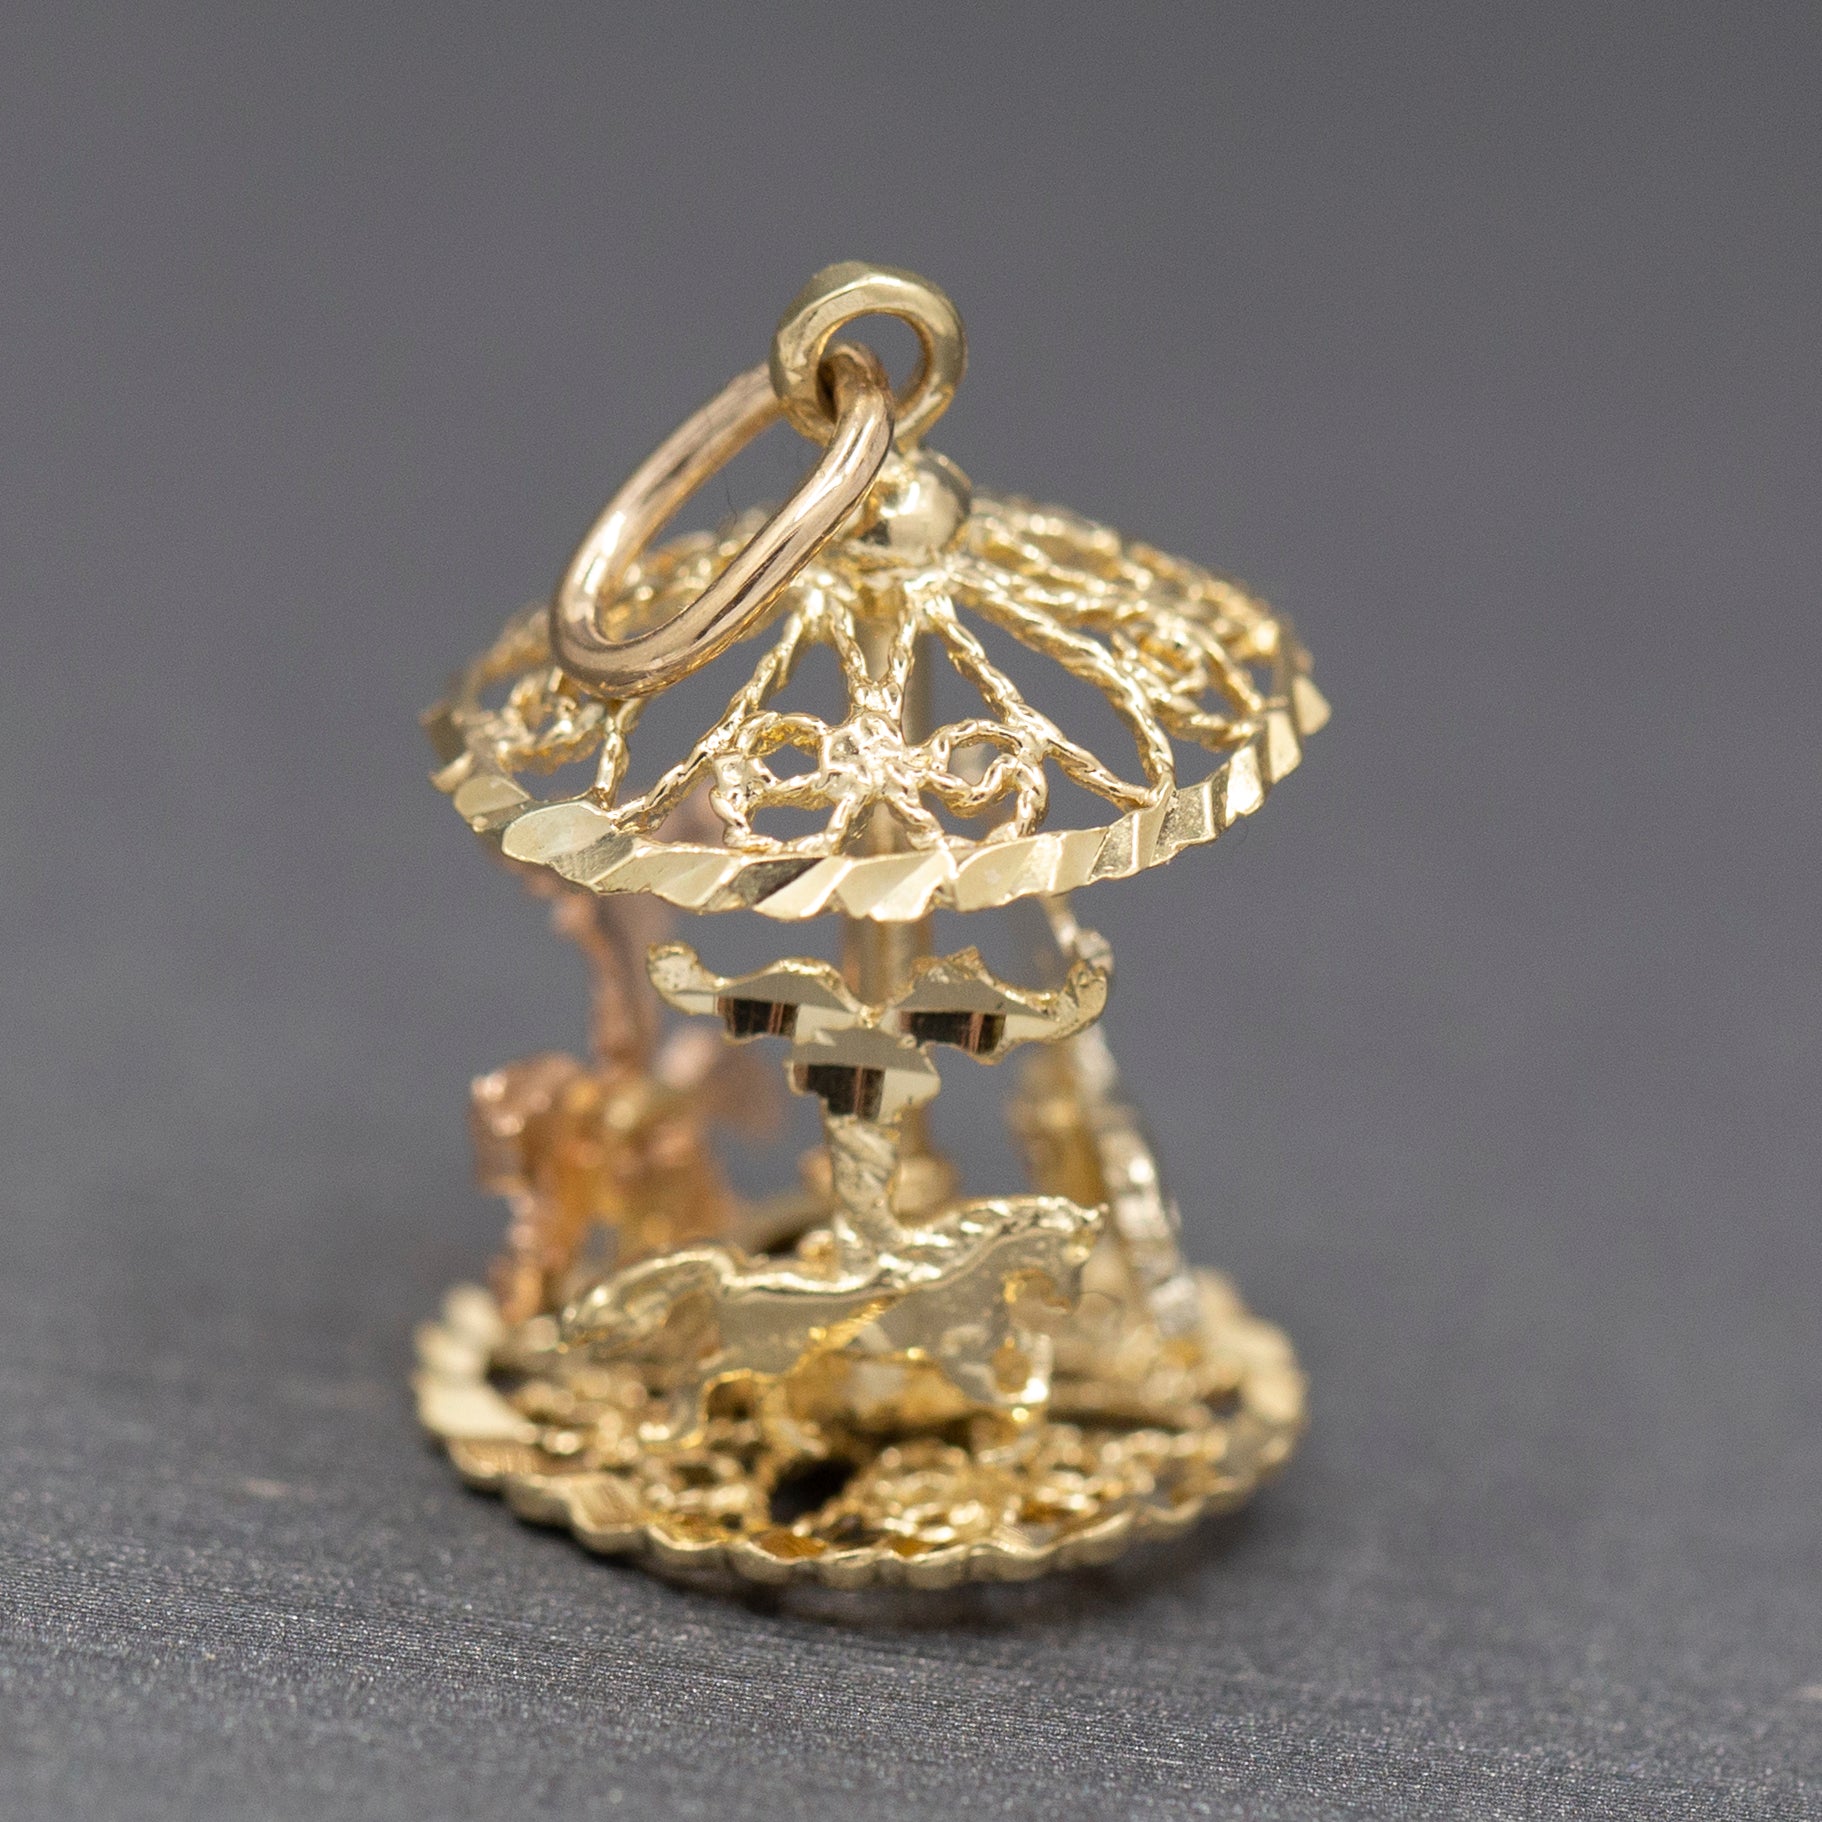 Spinning Horse Carousel Charm Pendant in 14k Rose White and Yellow Gold